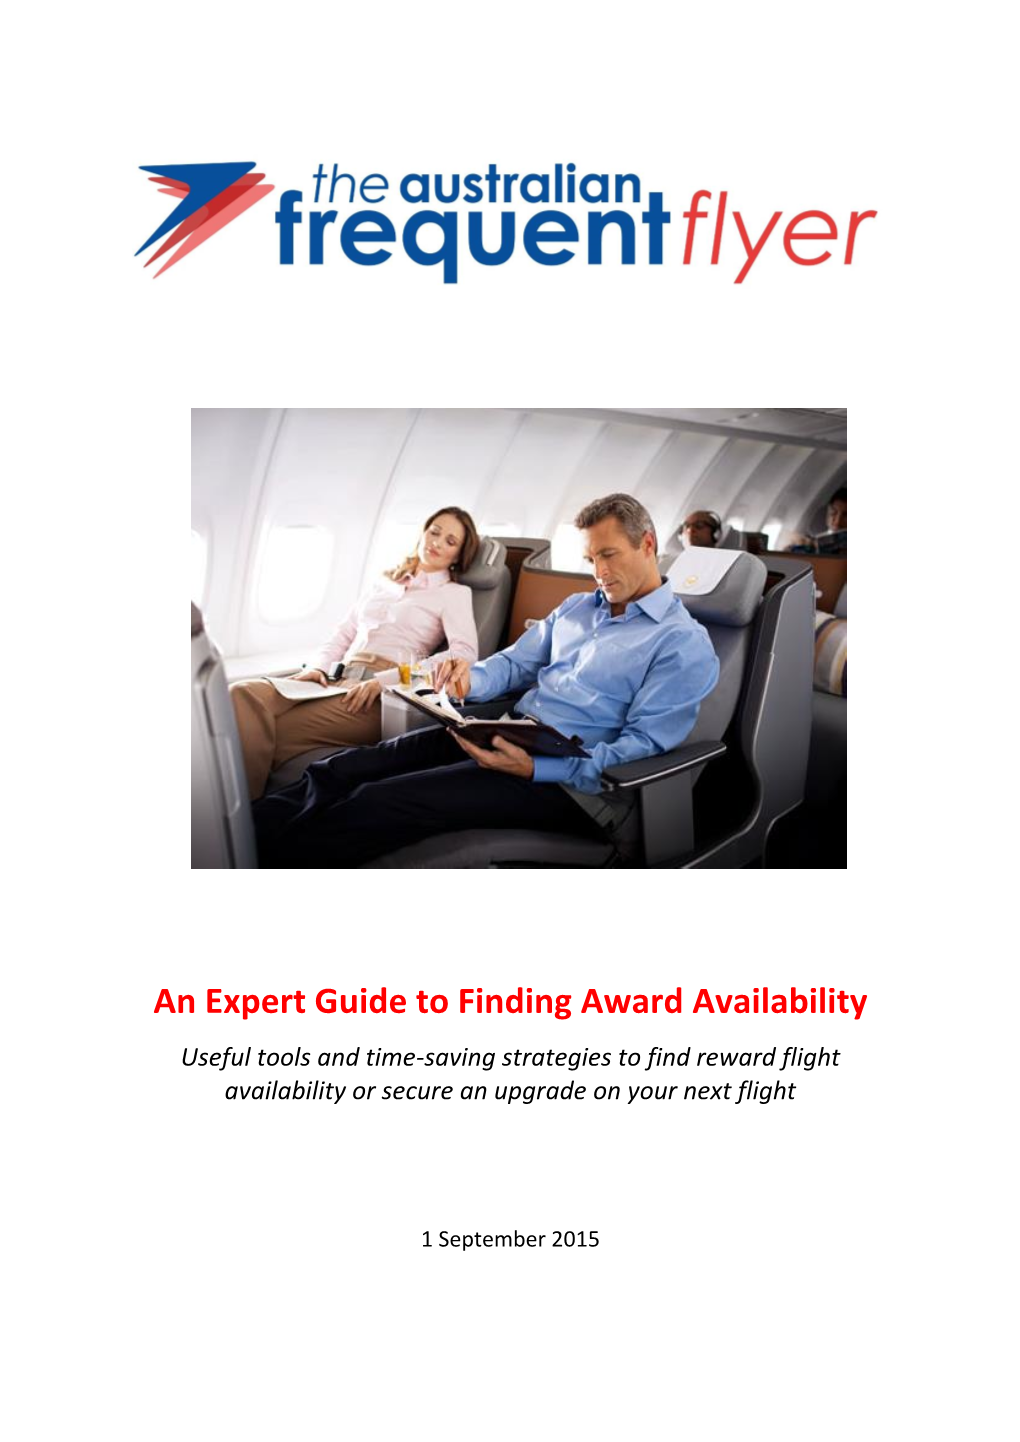 An Expert Guide to Finding Award Availability